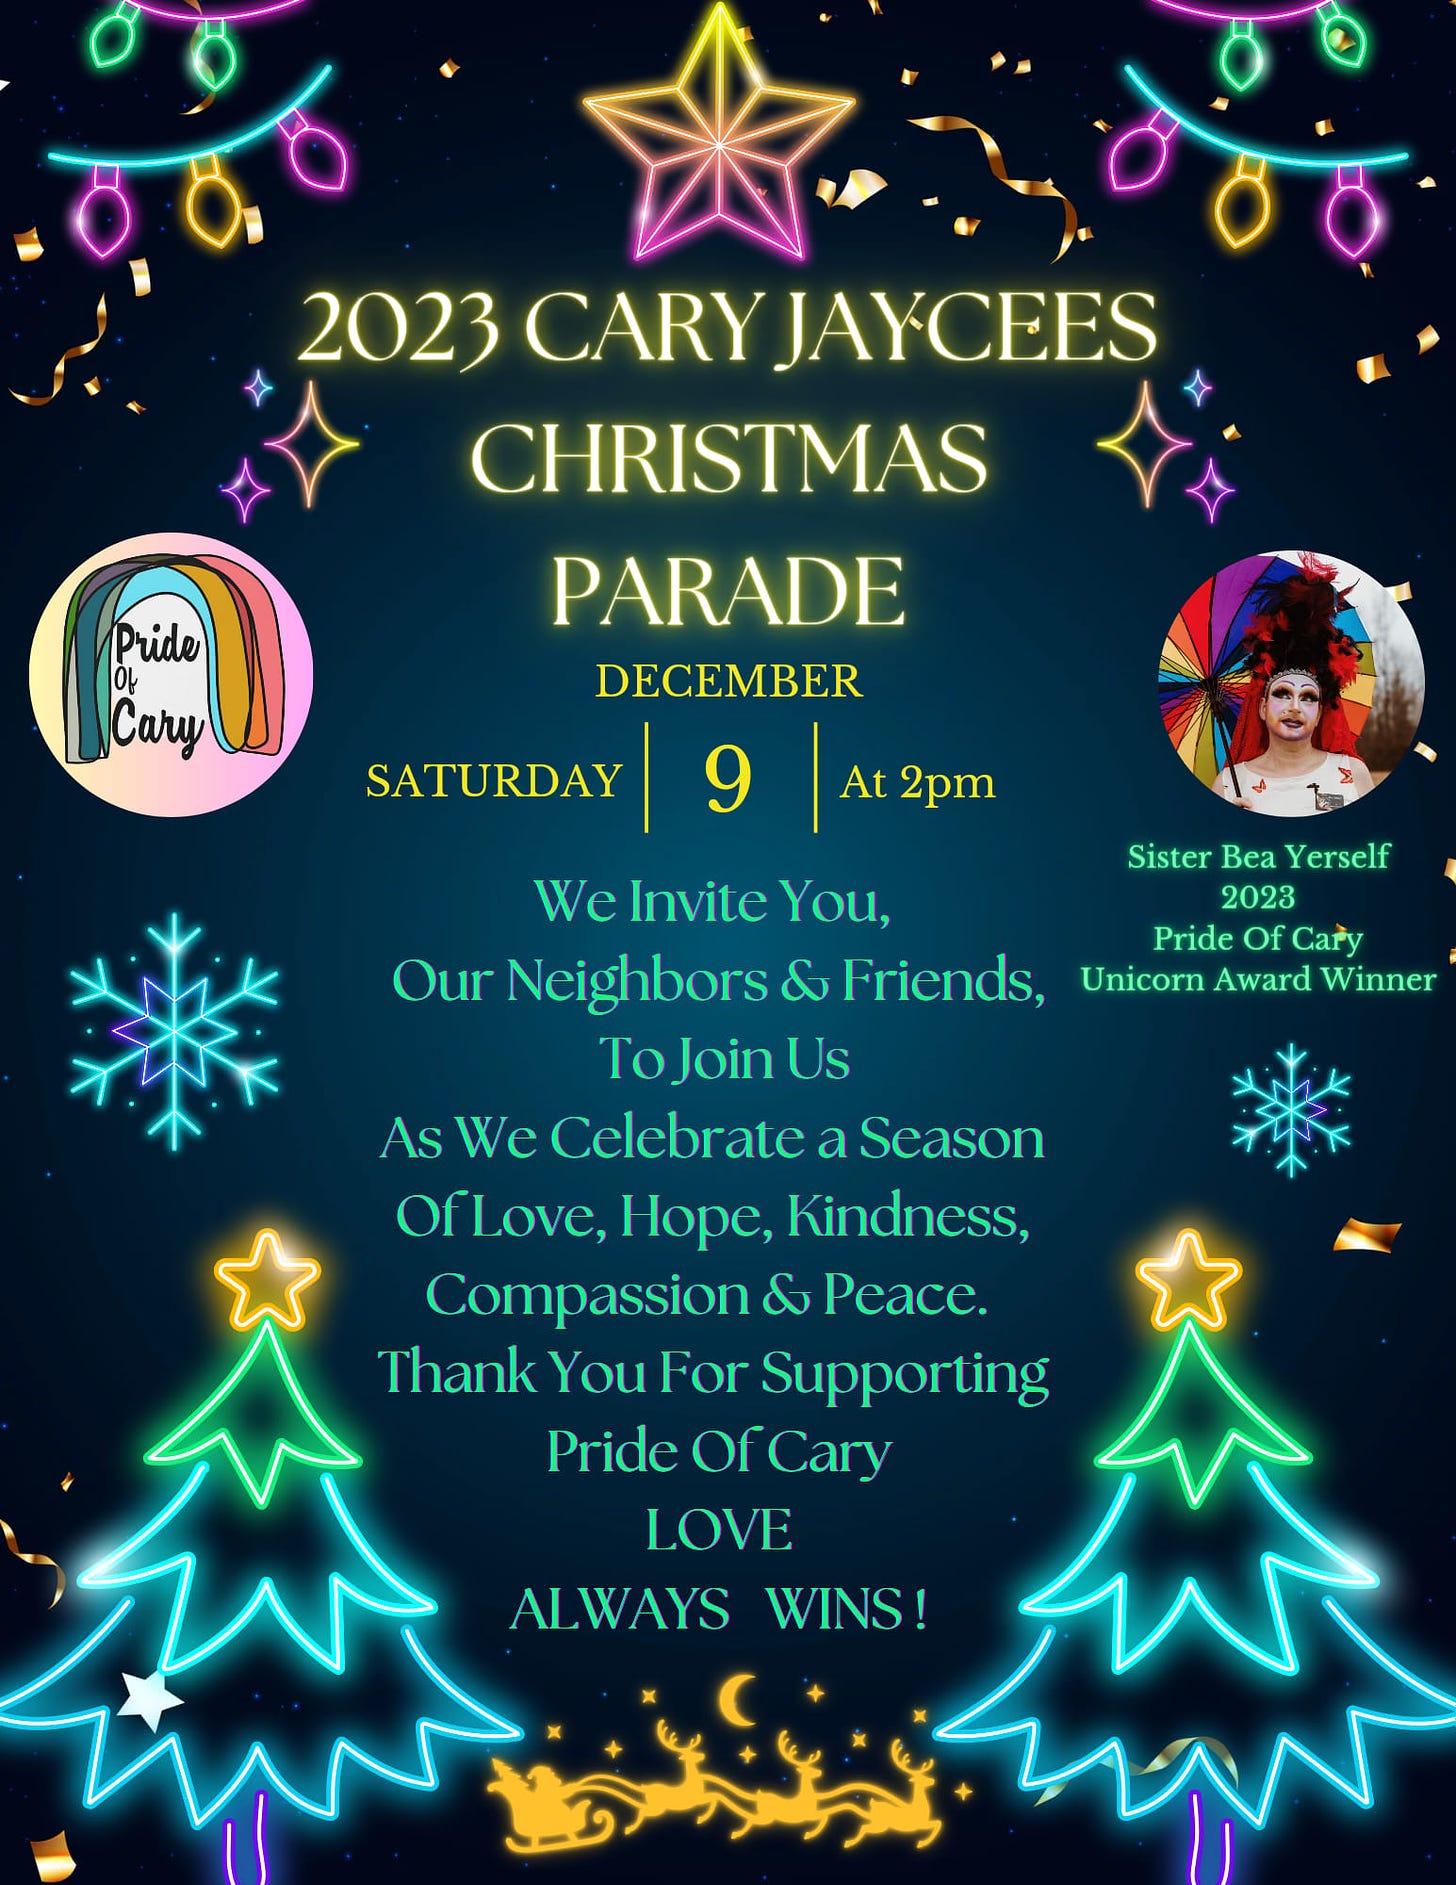 May be a graphic of ‎1 person, christmas tree and ‎text that says '‎2023CARYJAYCEES CARY JAYCEES CHRISTMAS PARADE DECEMBER 9 SATURDAY At 2pm Sister Bea Yerself ۔ne You, 2023 Pride Of Cary Neighbors Friends, Unicorn Award Winner ToJoinUs Celebrate a Season OfLove,Hope, Kindness, Compassion & Peace. Thank You For Supporting Pride Cary LOVE ALWAYS WINS!‎'‎‎